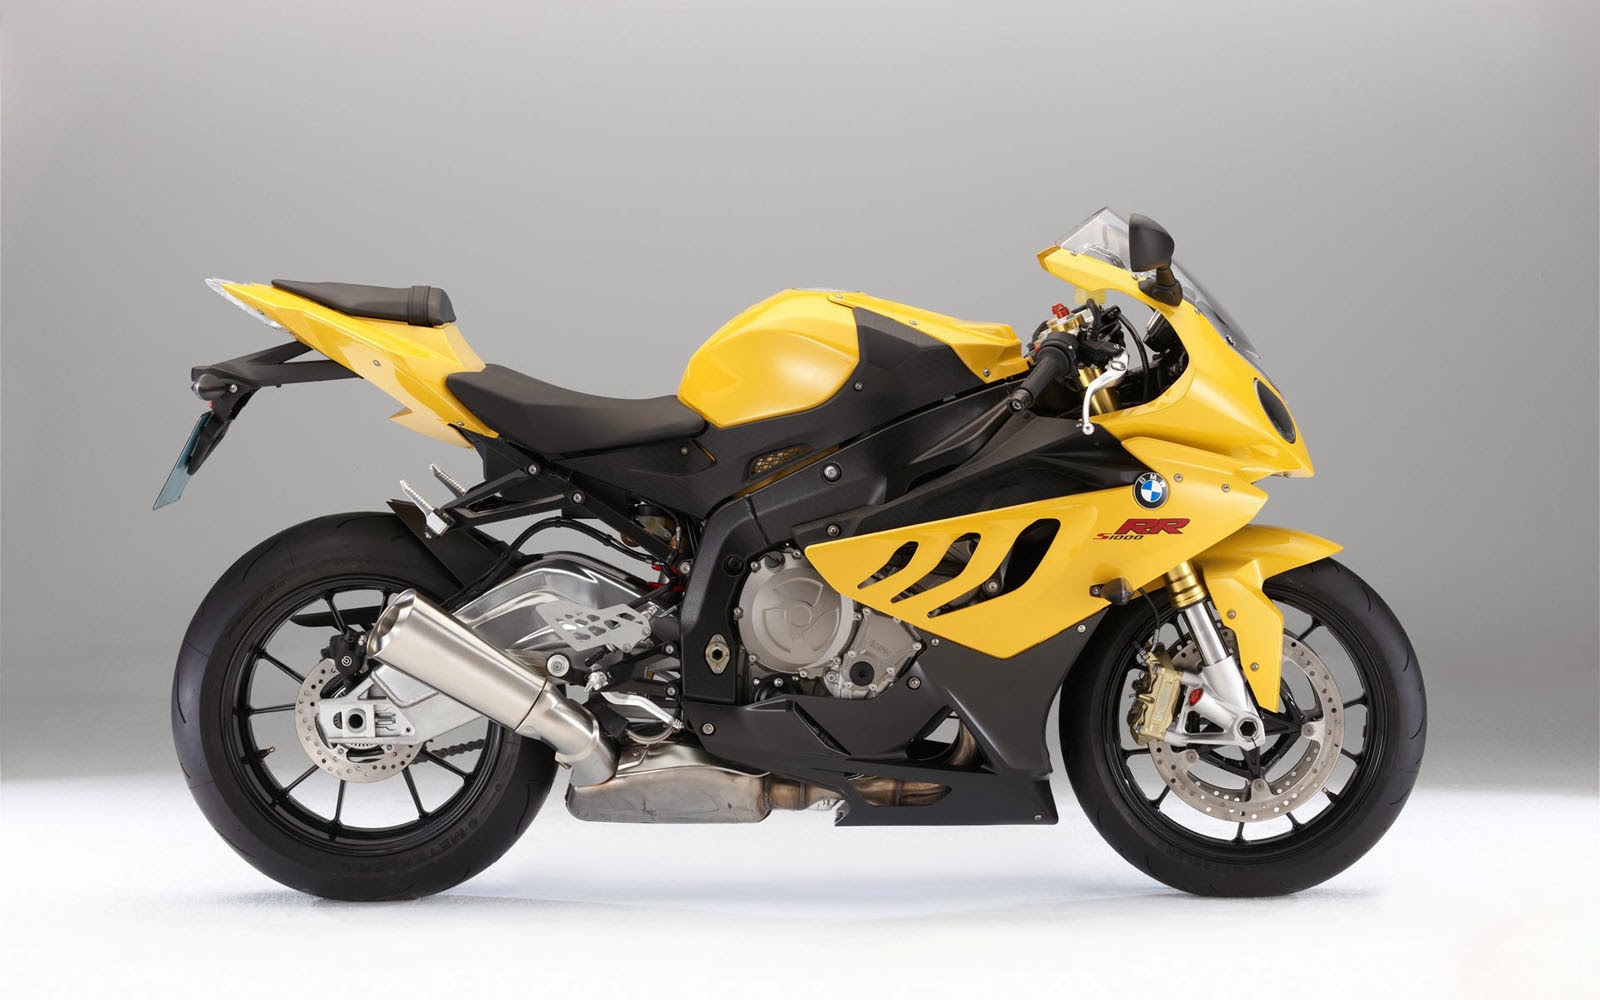 Tag BMW S1000RR Wallpapers Backgrounds Photos Images and Pictures